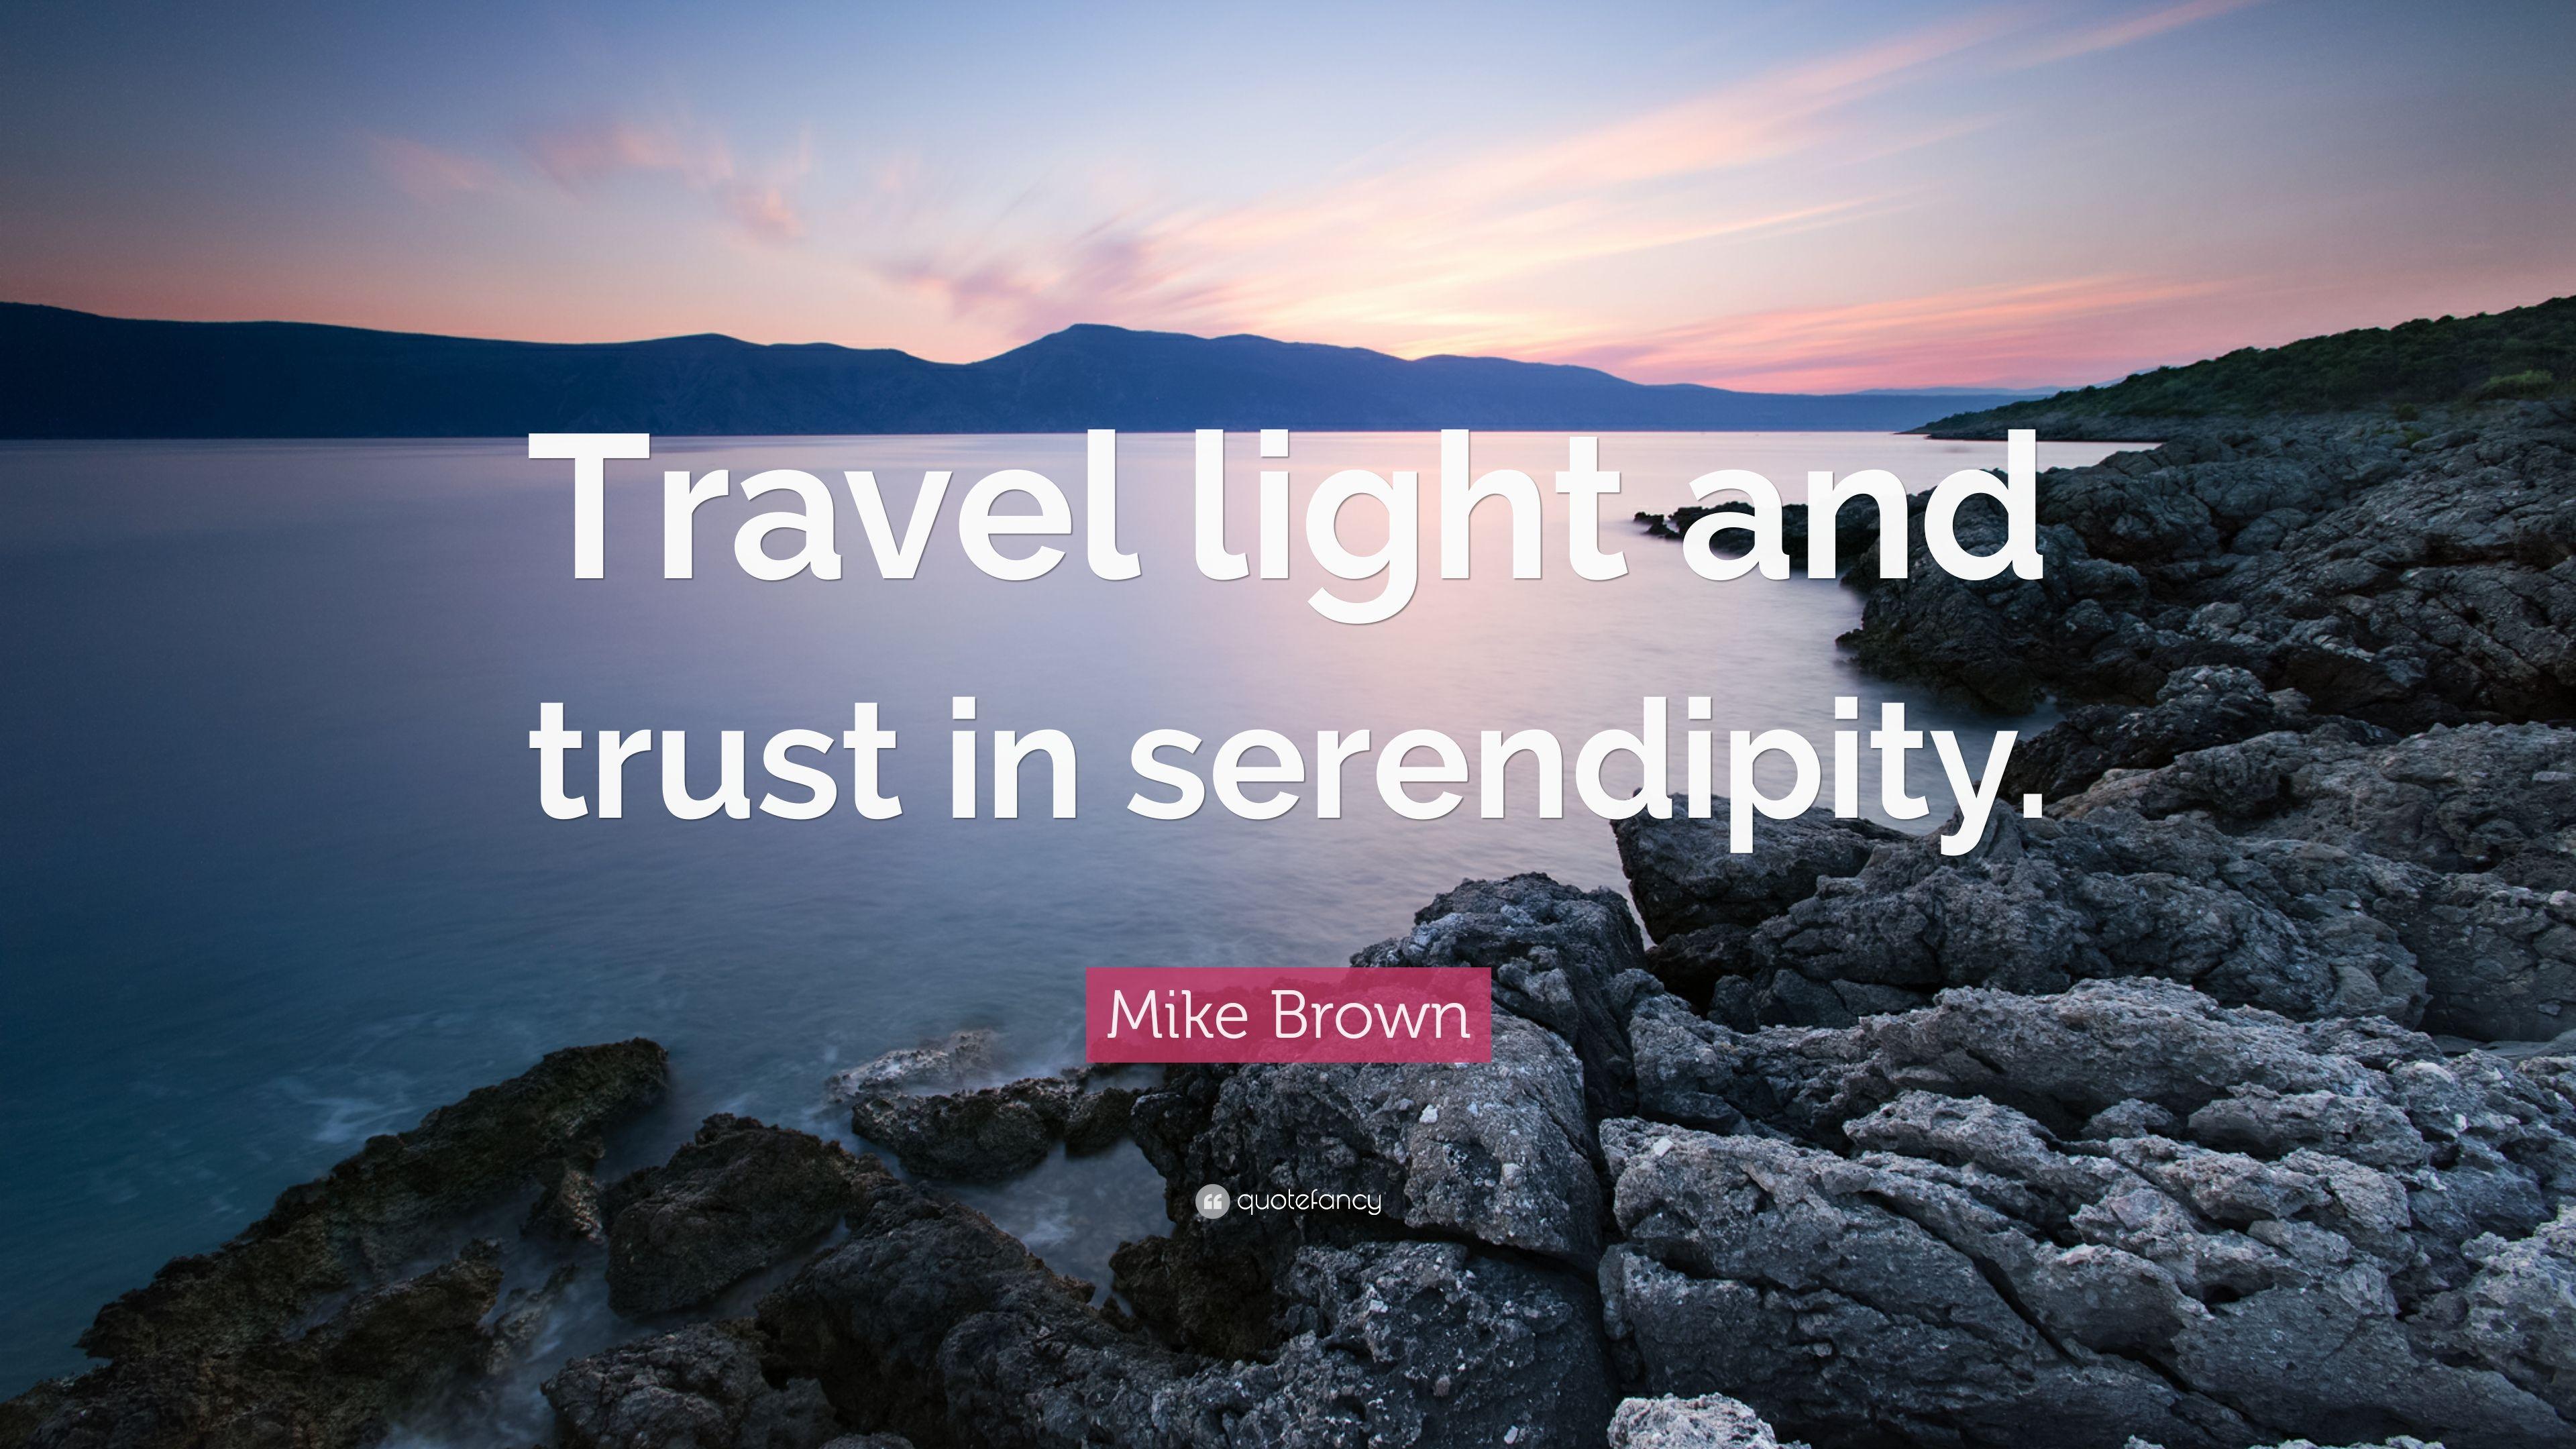 Mike Brown Quote: “Travel light and trust in serendipity.” 7